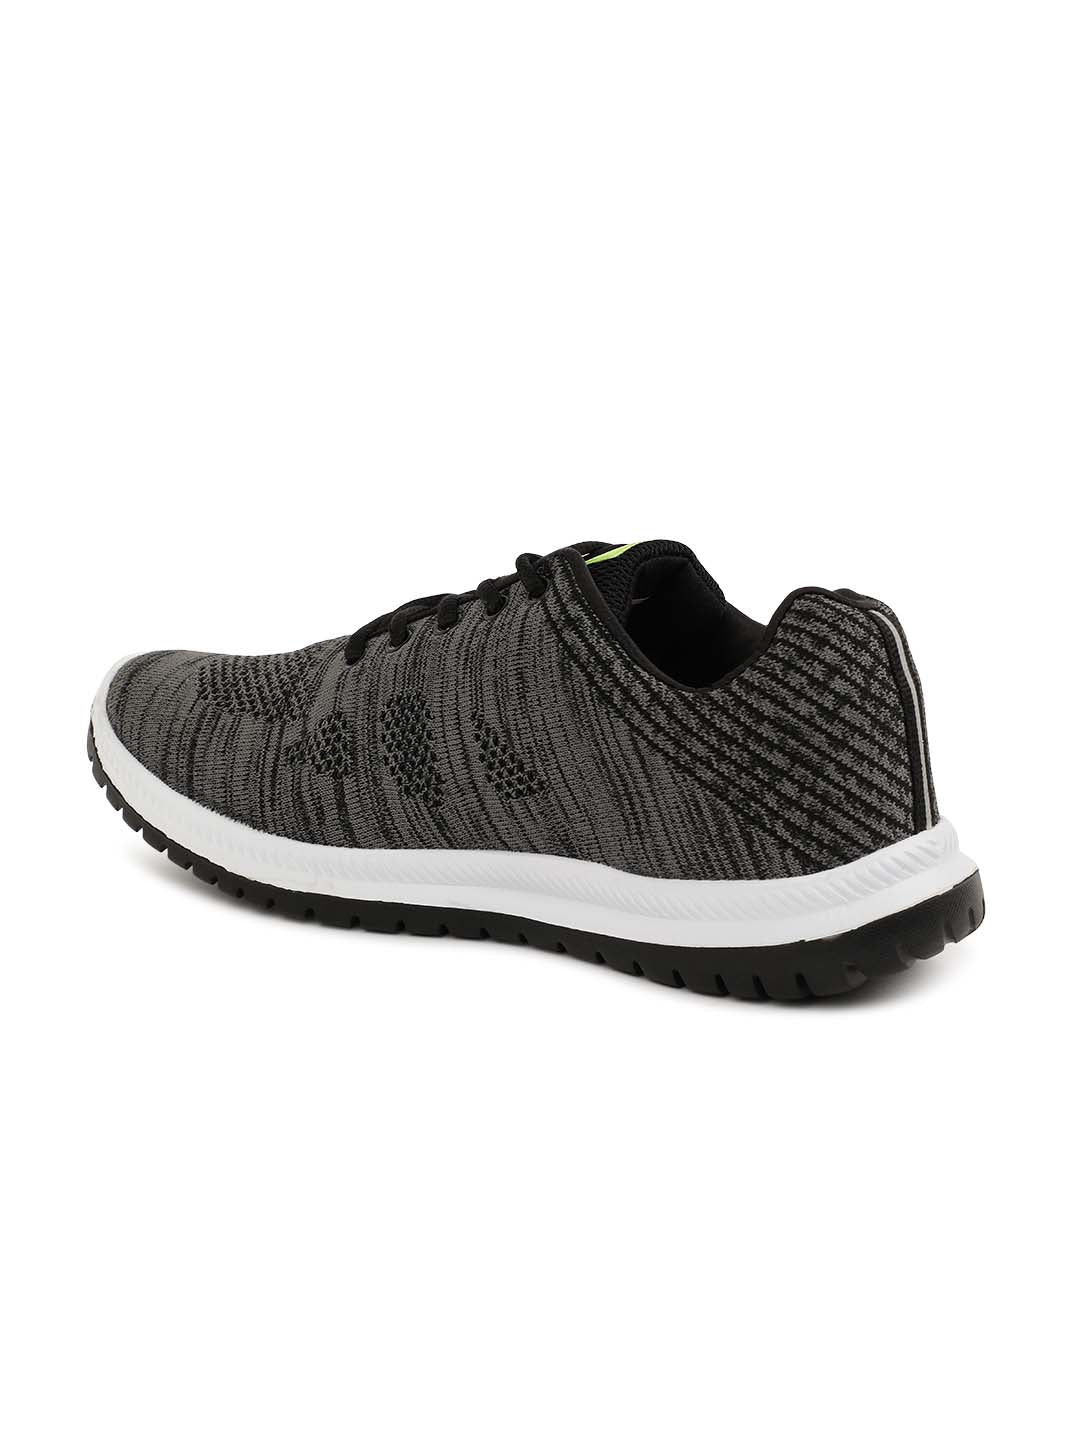 Stimulus FB99860GP Black And Grey Comfortable Daily Outdoor Sports Shoes For Men